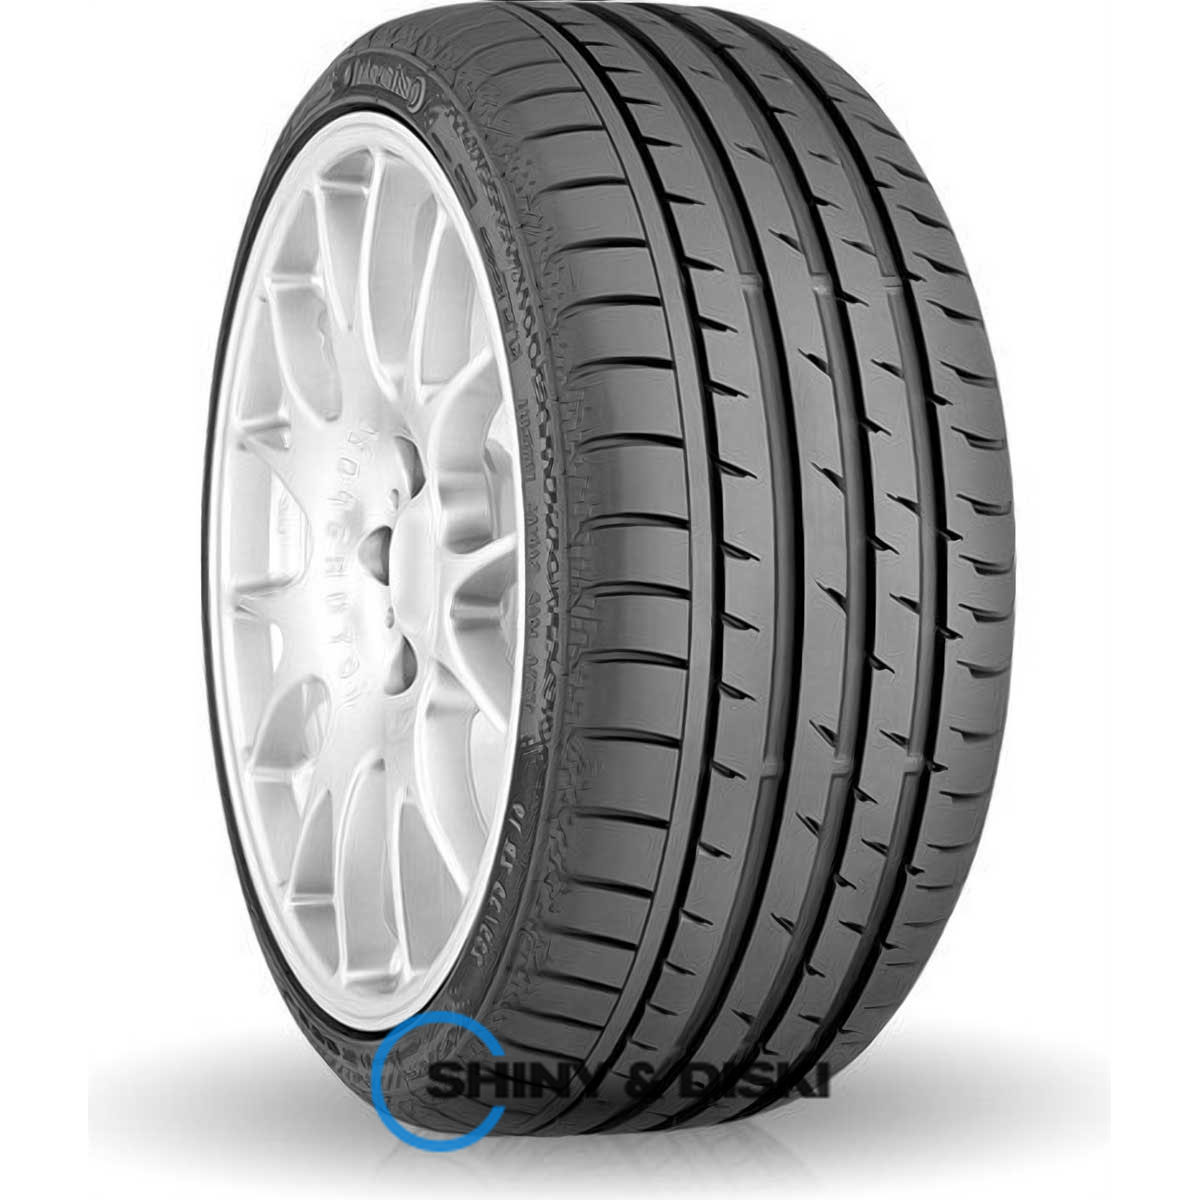 резина continental sportcontact 3 285/35 r18 101y xl mo fr